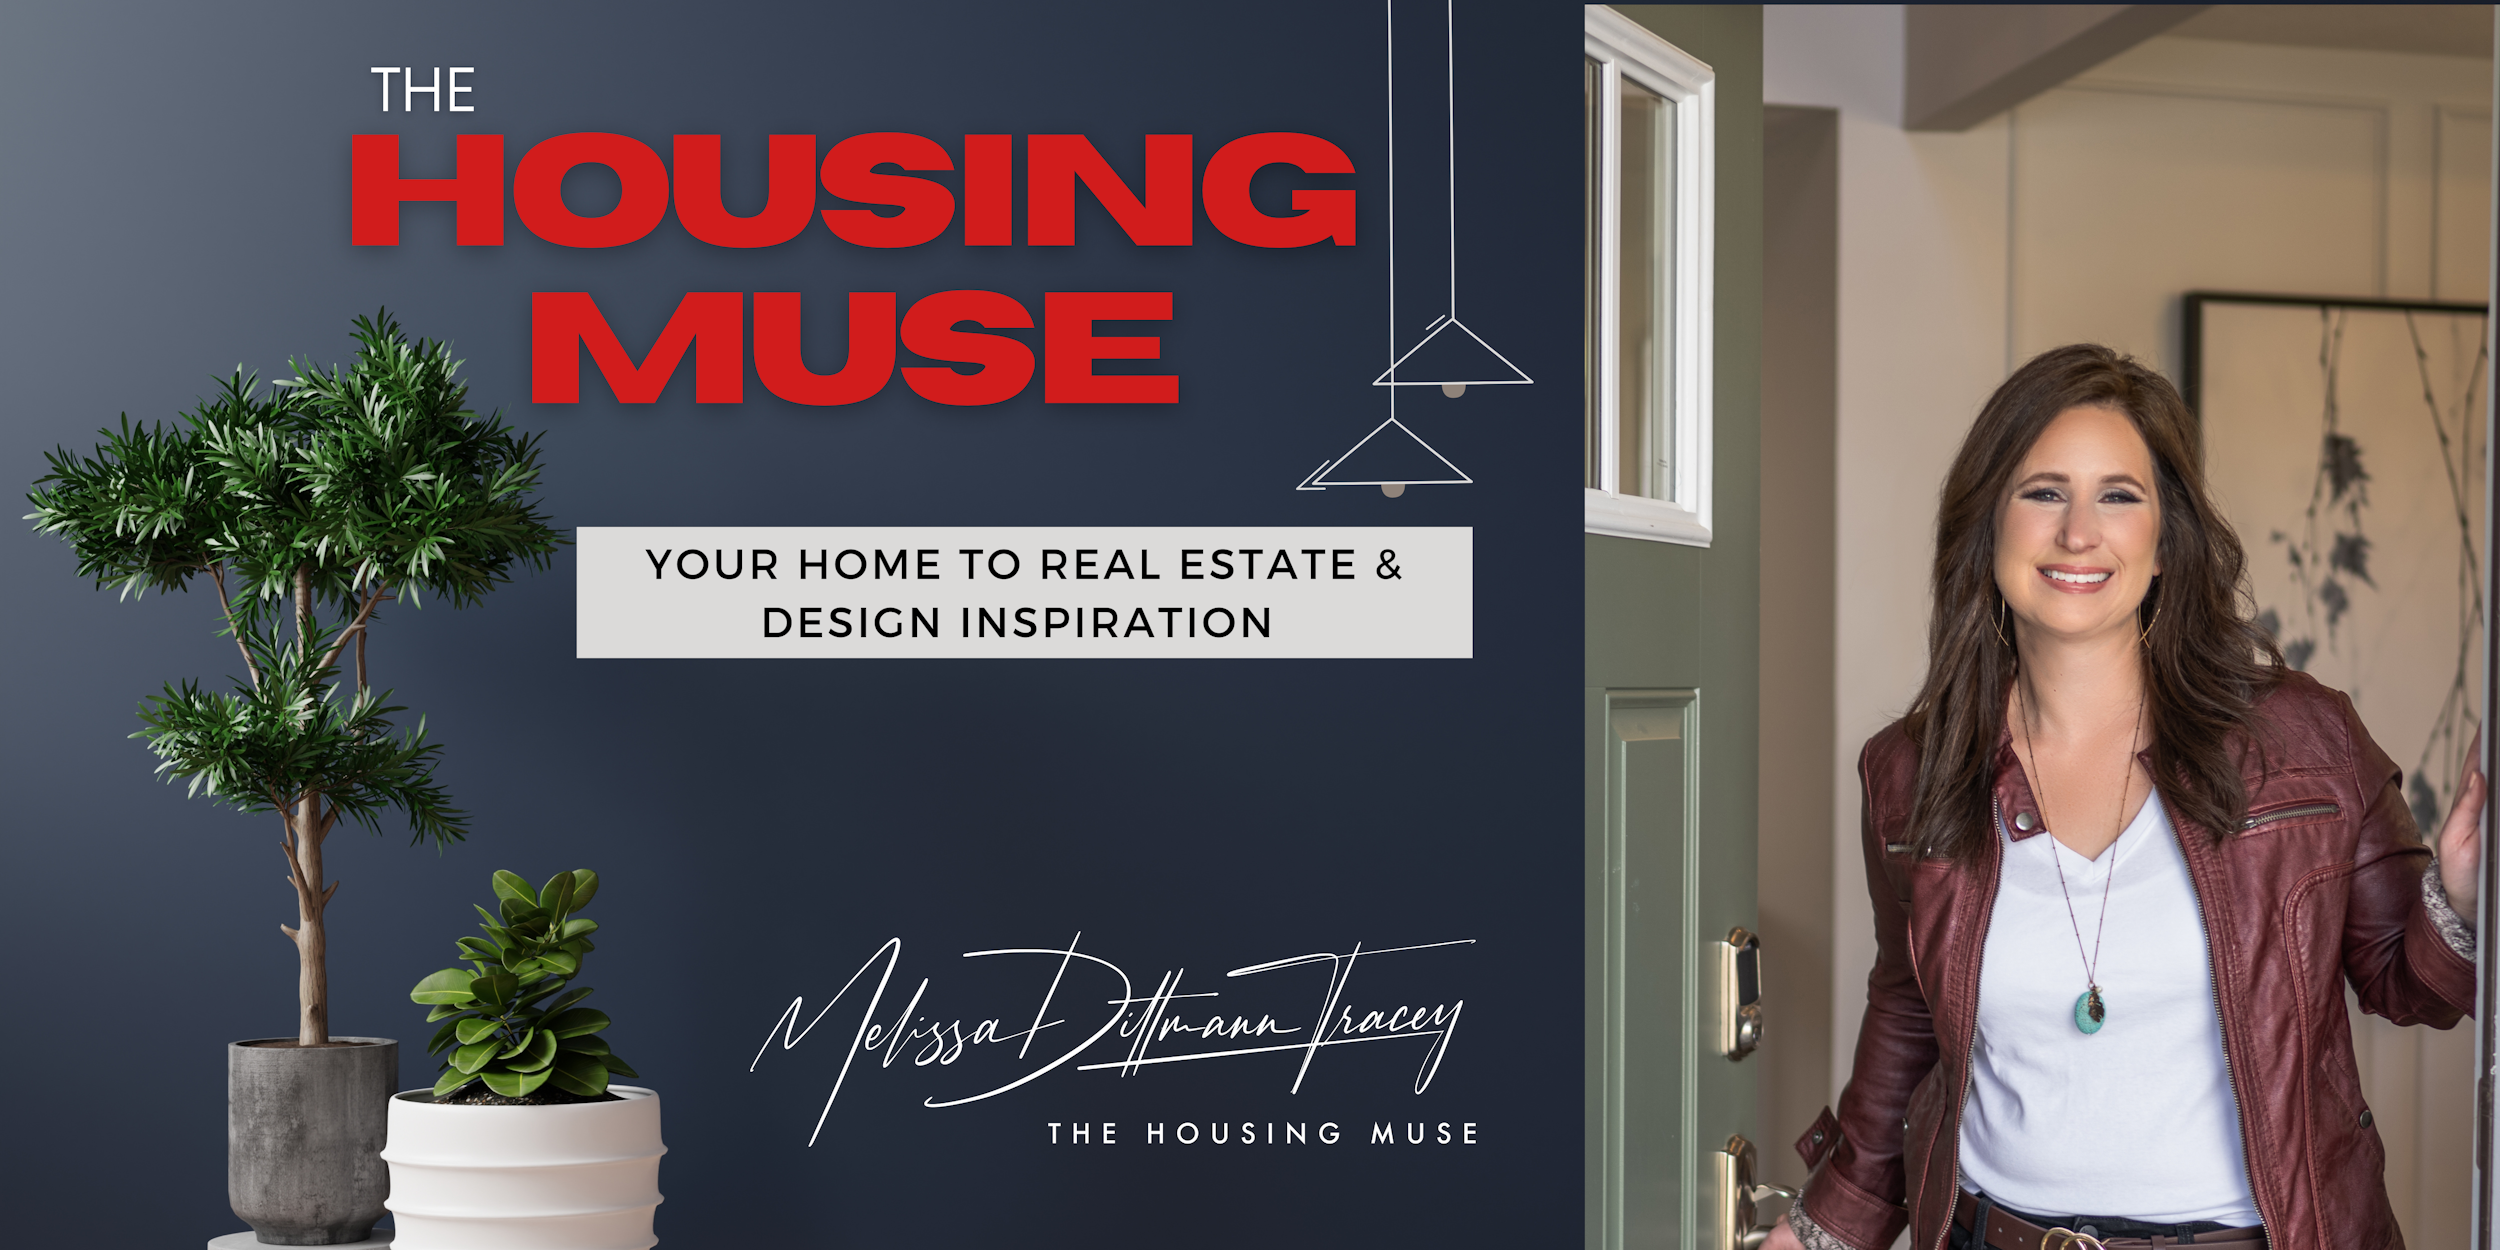 The Housing Muse